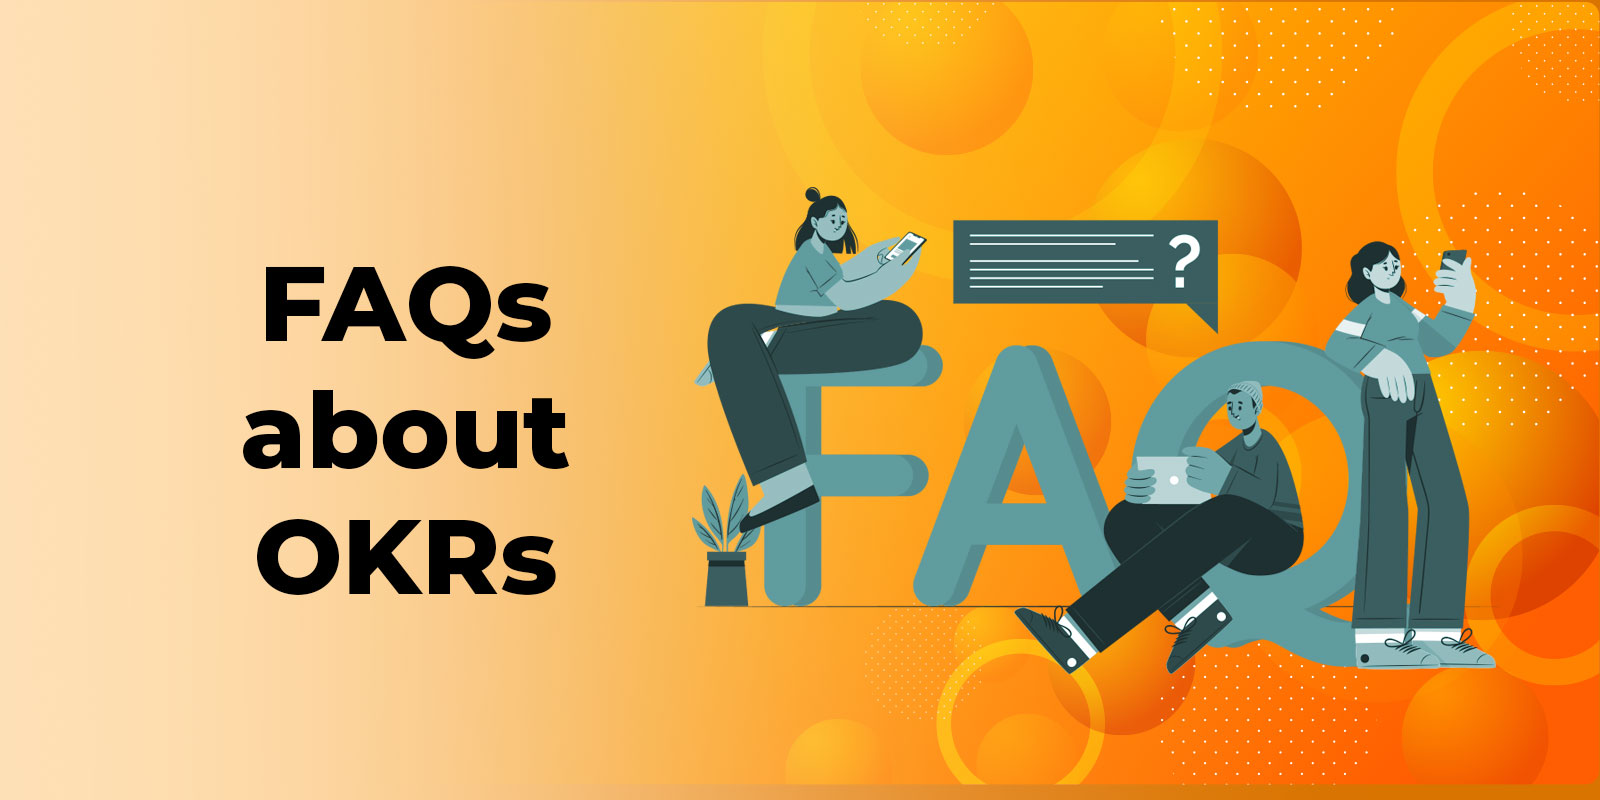 12 Powerful FAQs About OKRs That Propel Your Goals Forward